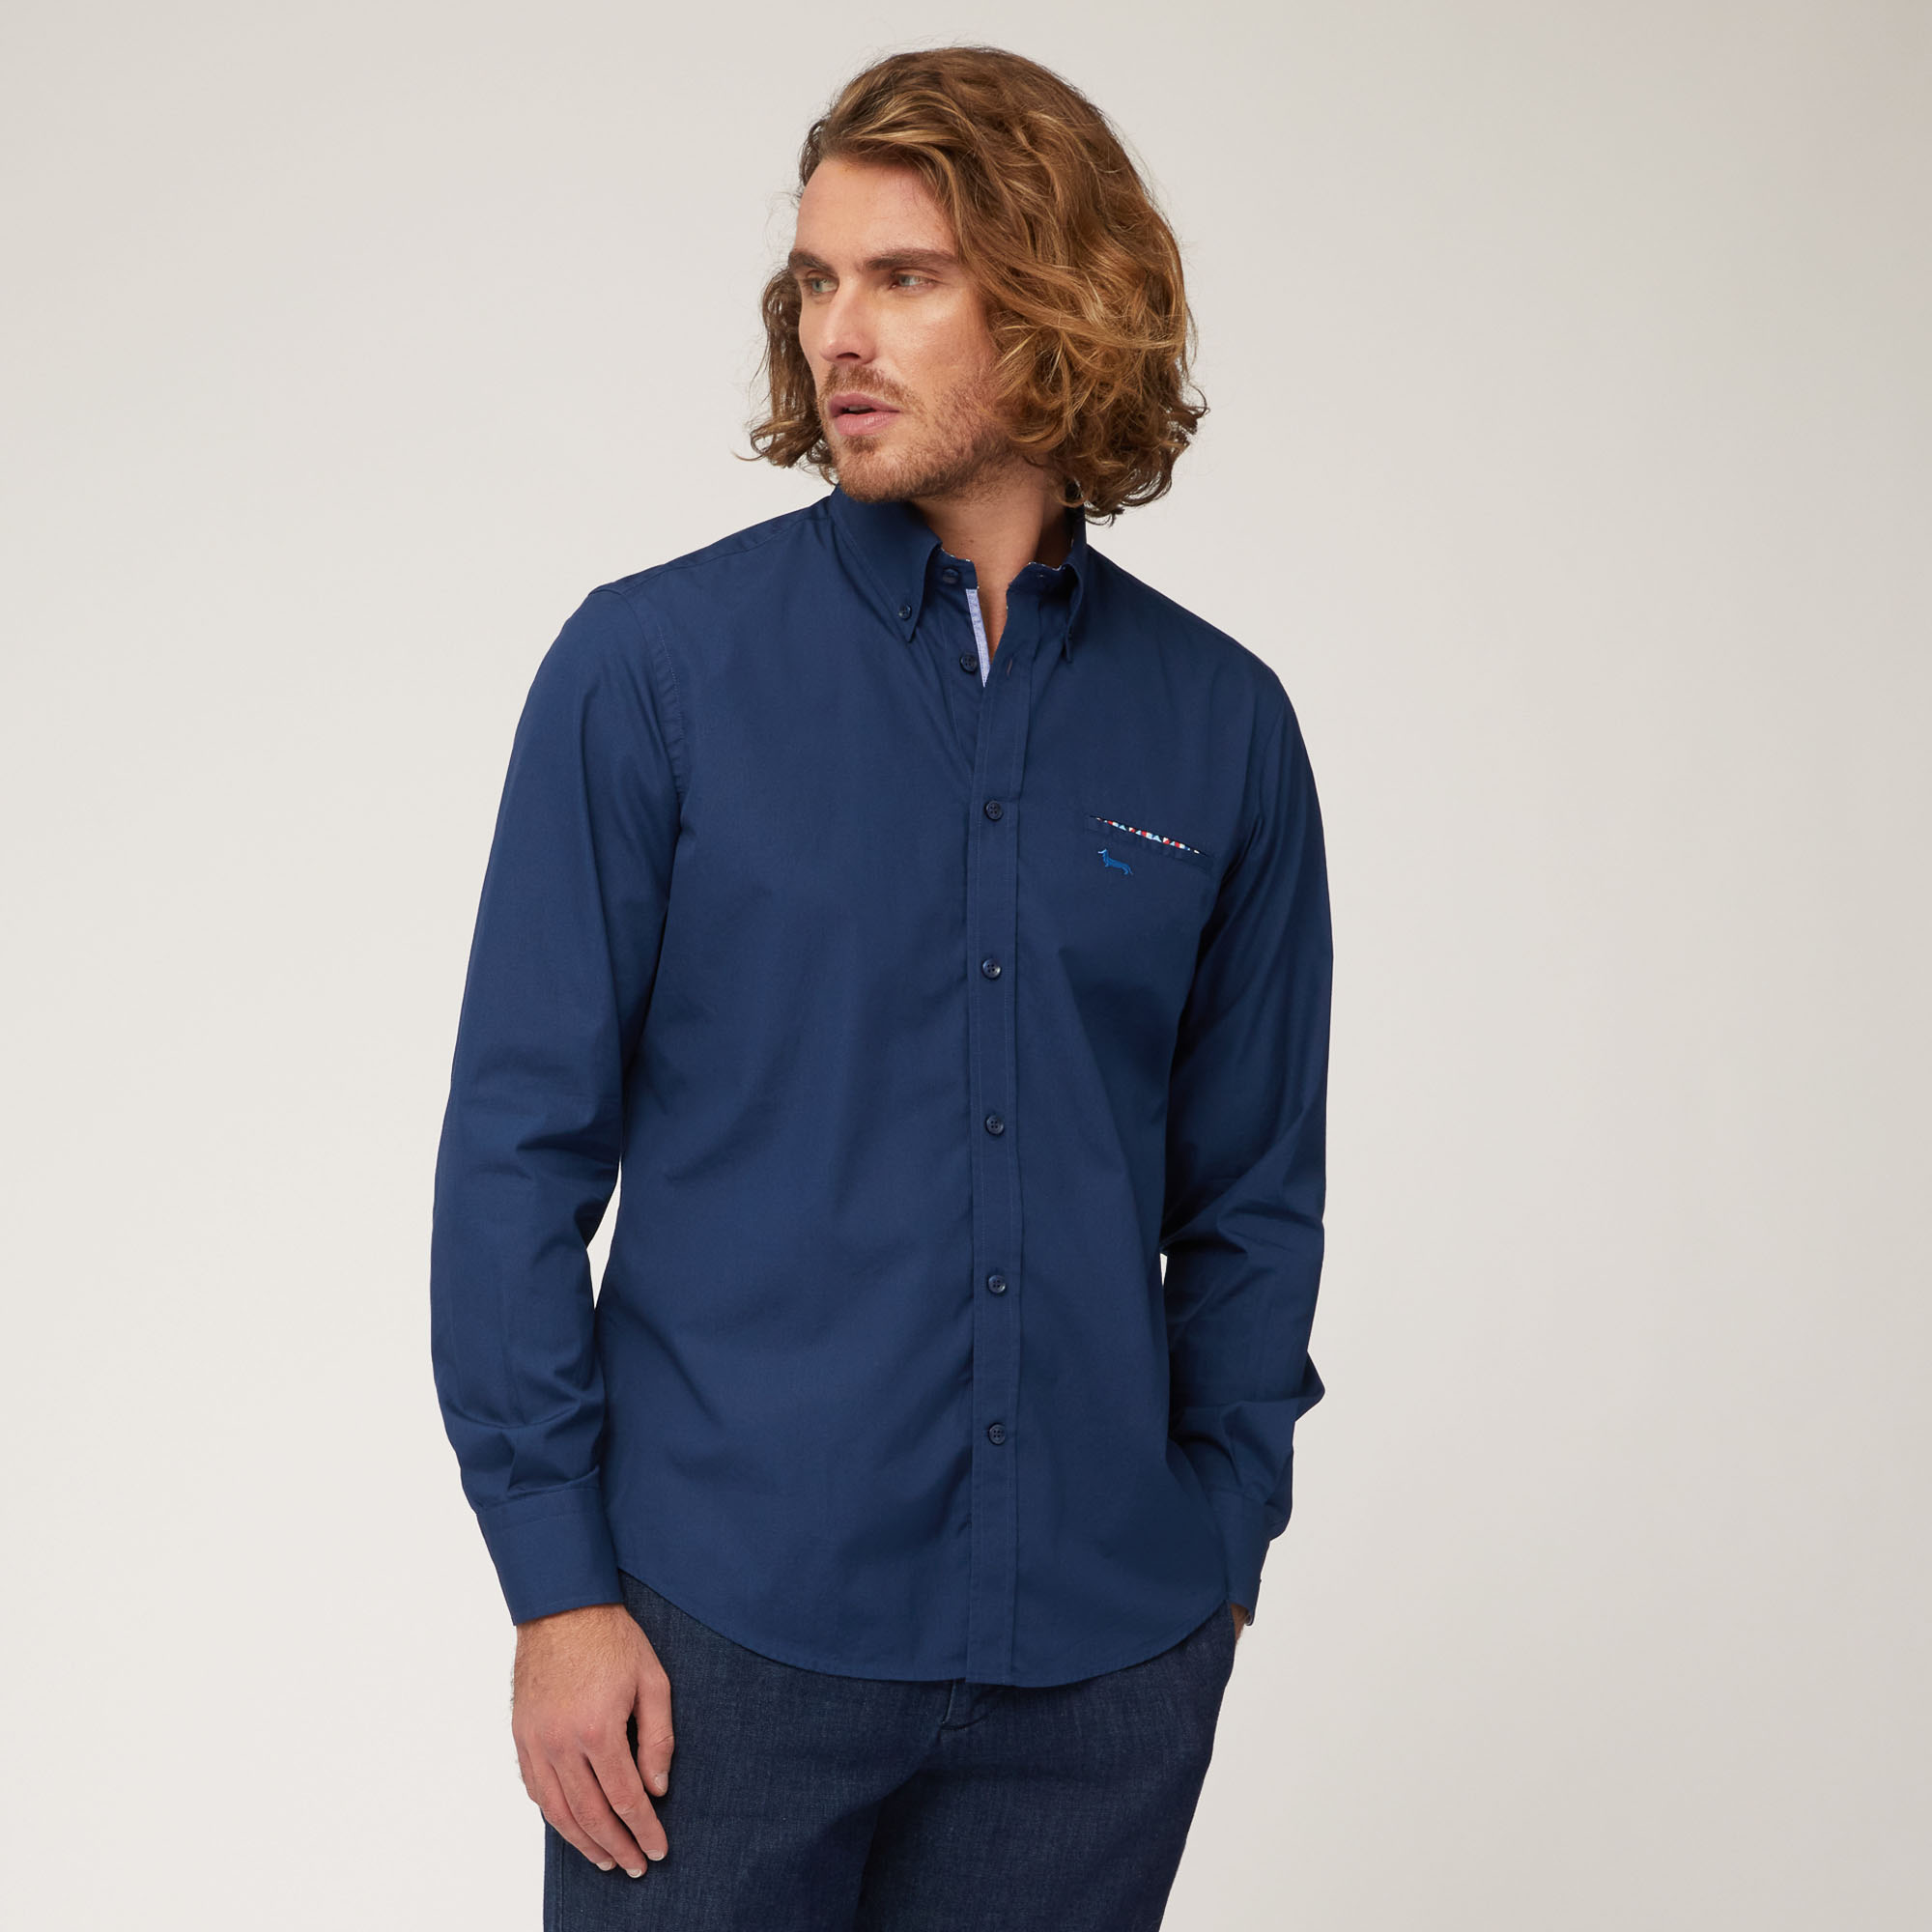 Cotton Shirt with Breast Pocket